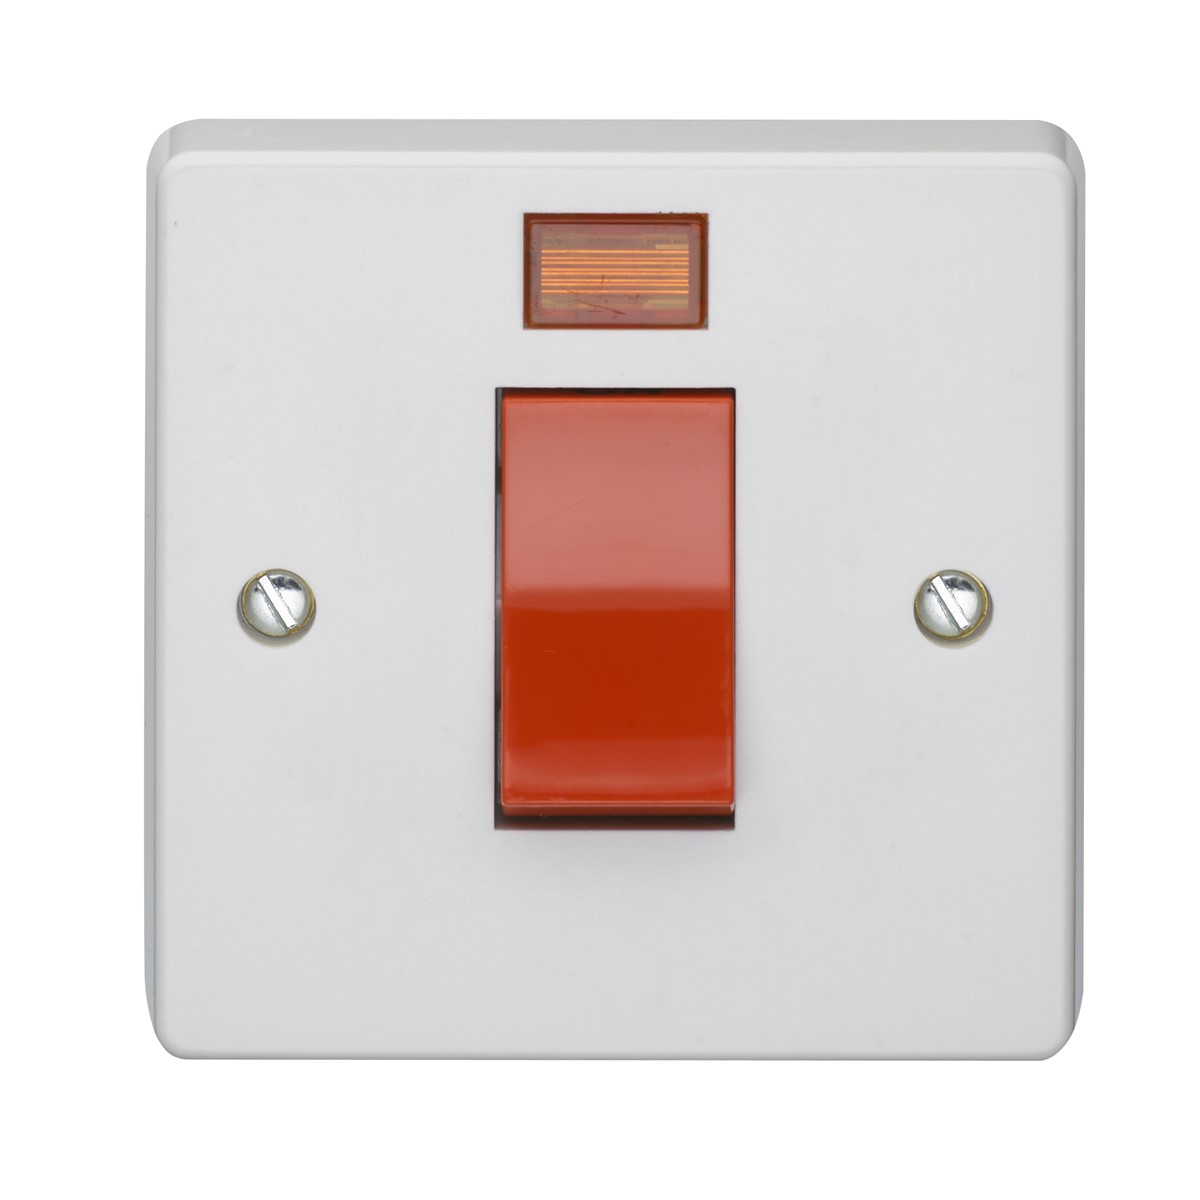 Crabtree 4016/3 1 Gang Switch with LED DP 45A